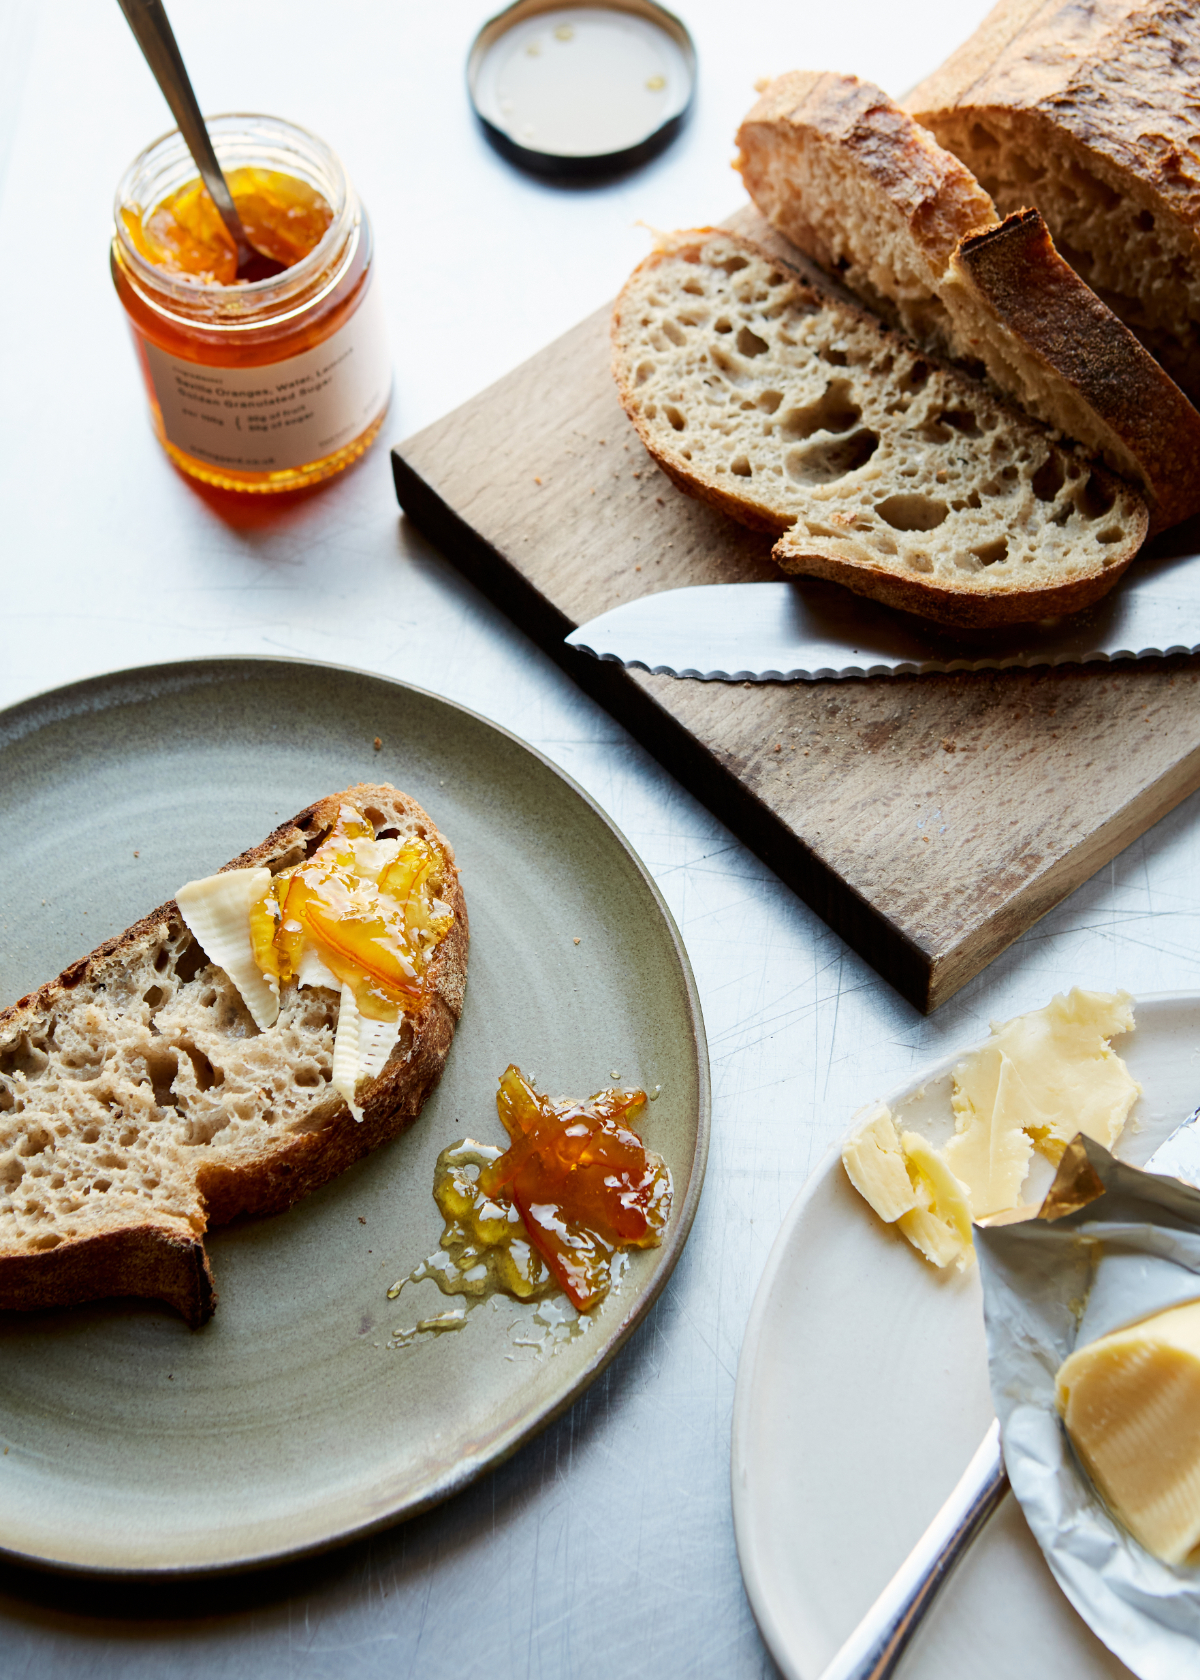 Bread, butter and marmalade